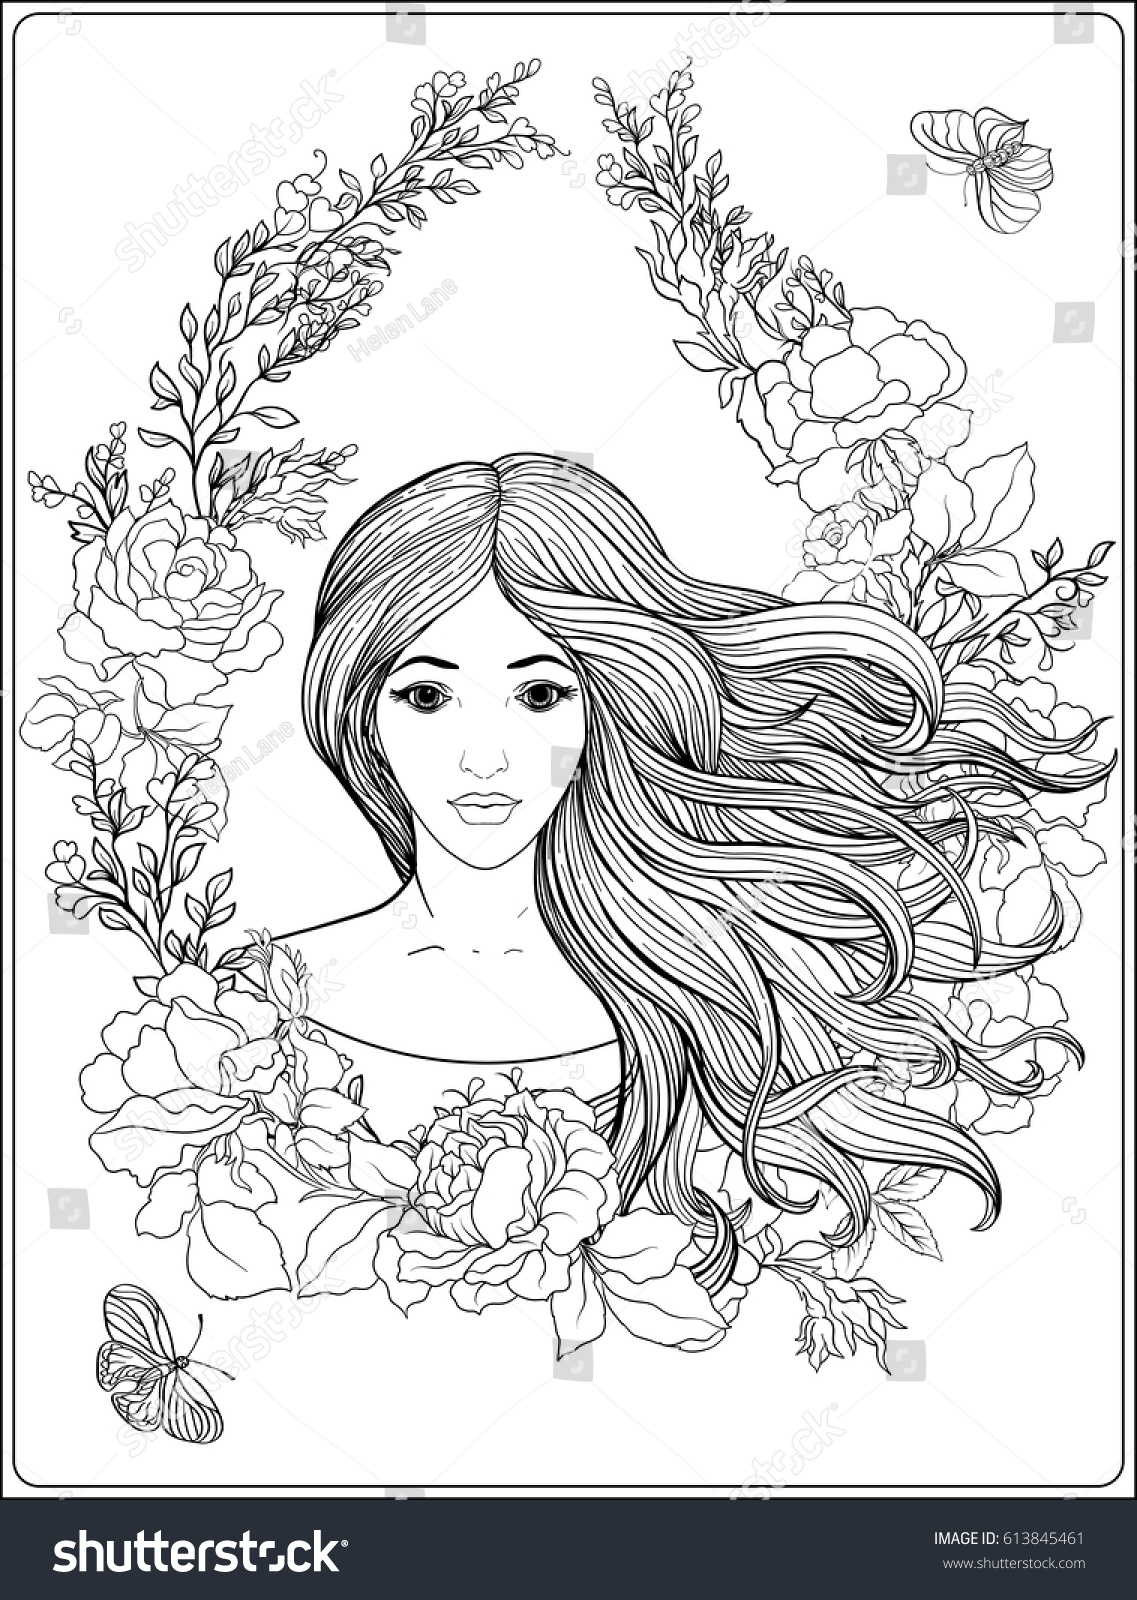 Long Hair Coloring Pages For Adults Girl - Coloring Page